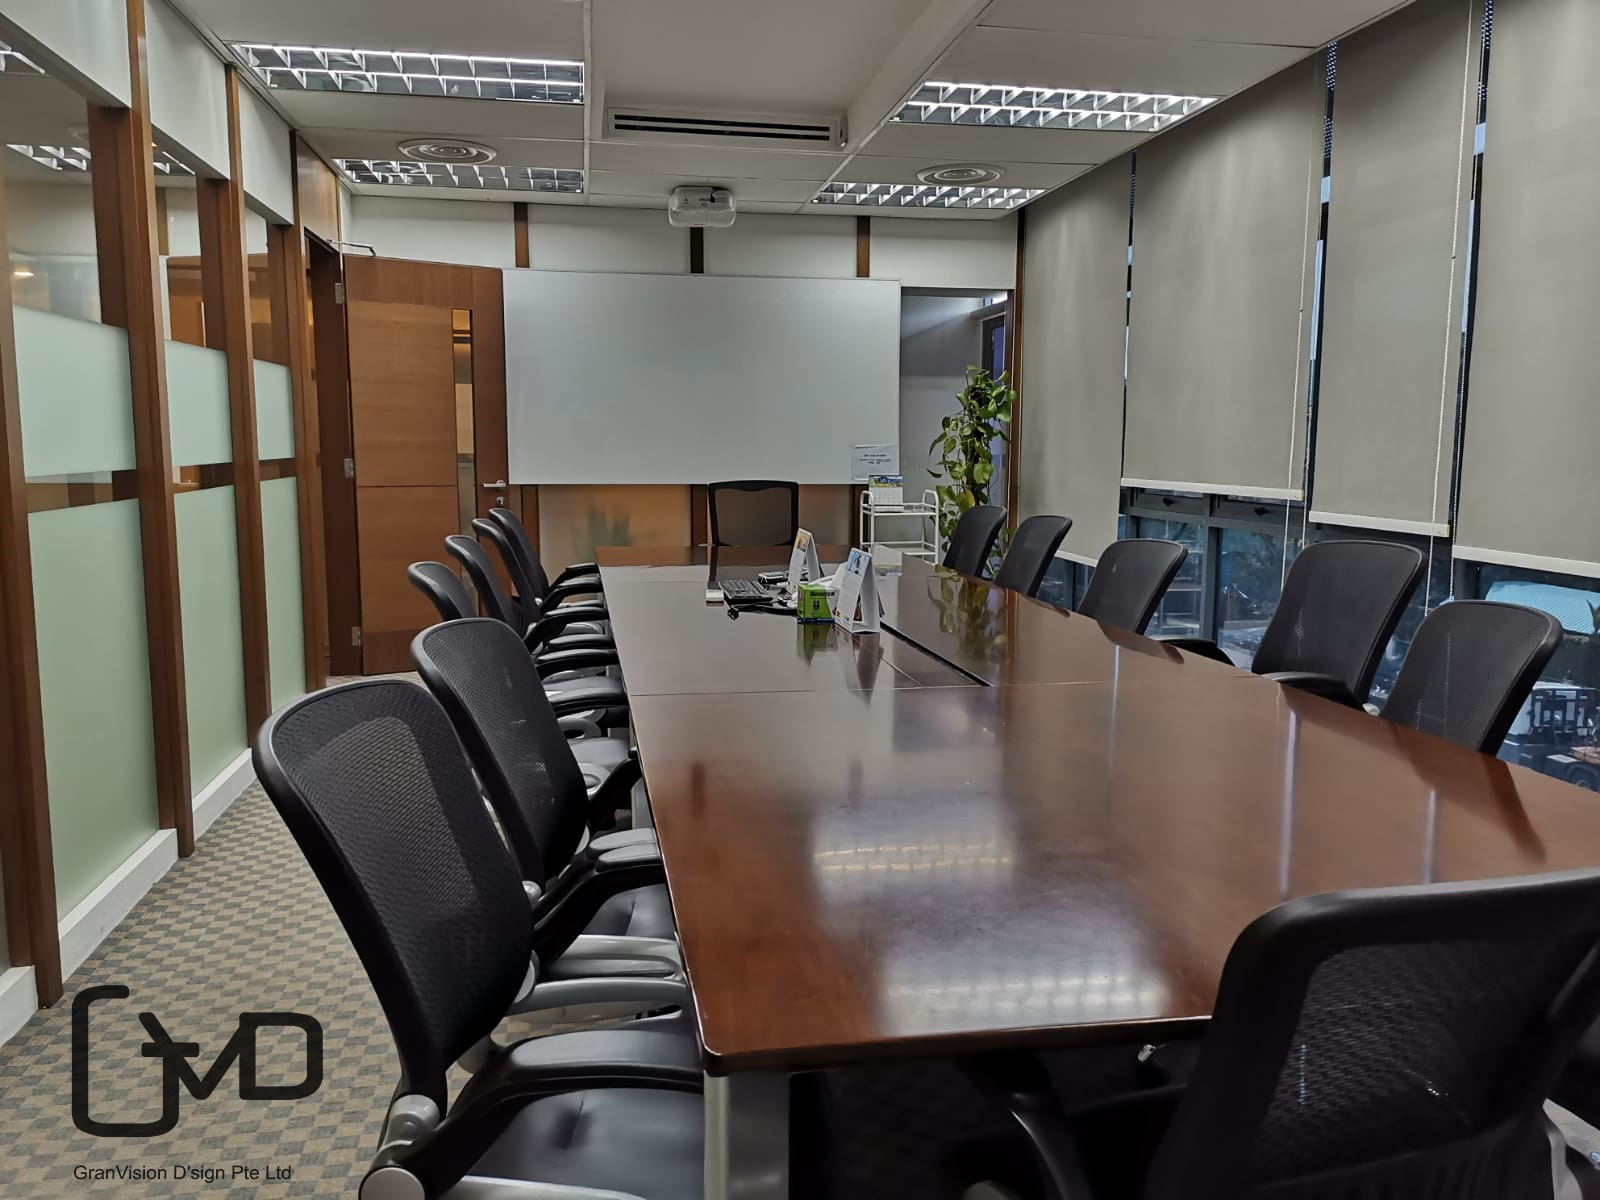 Contemporary Design - Commercial - Office - Design by GranVision D'sign Pte Ltd